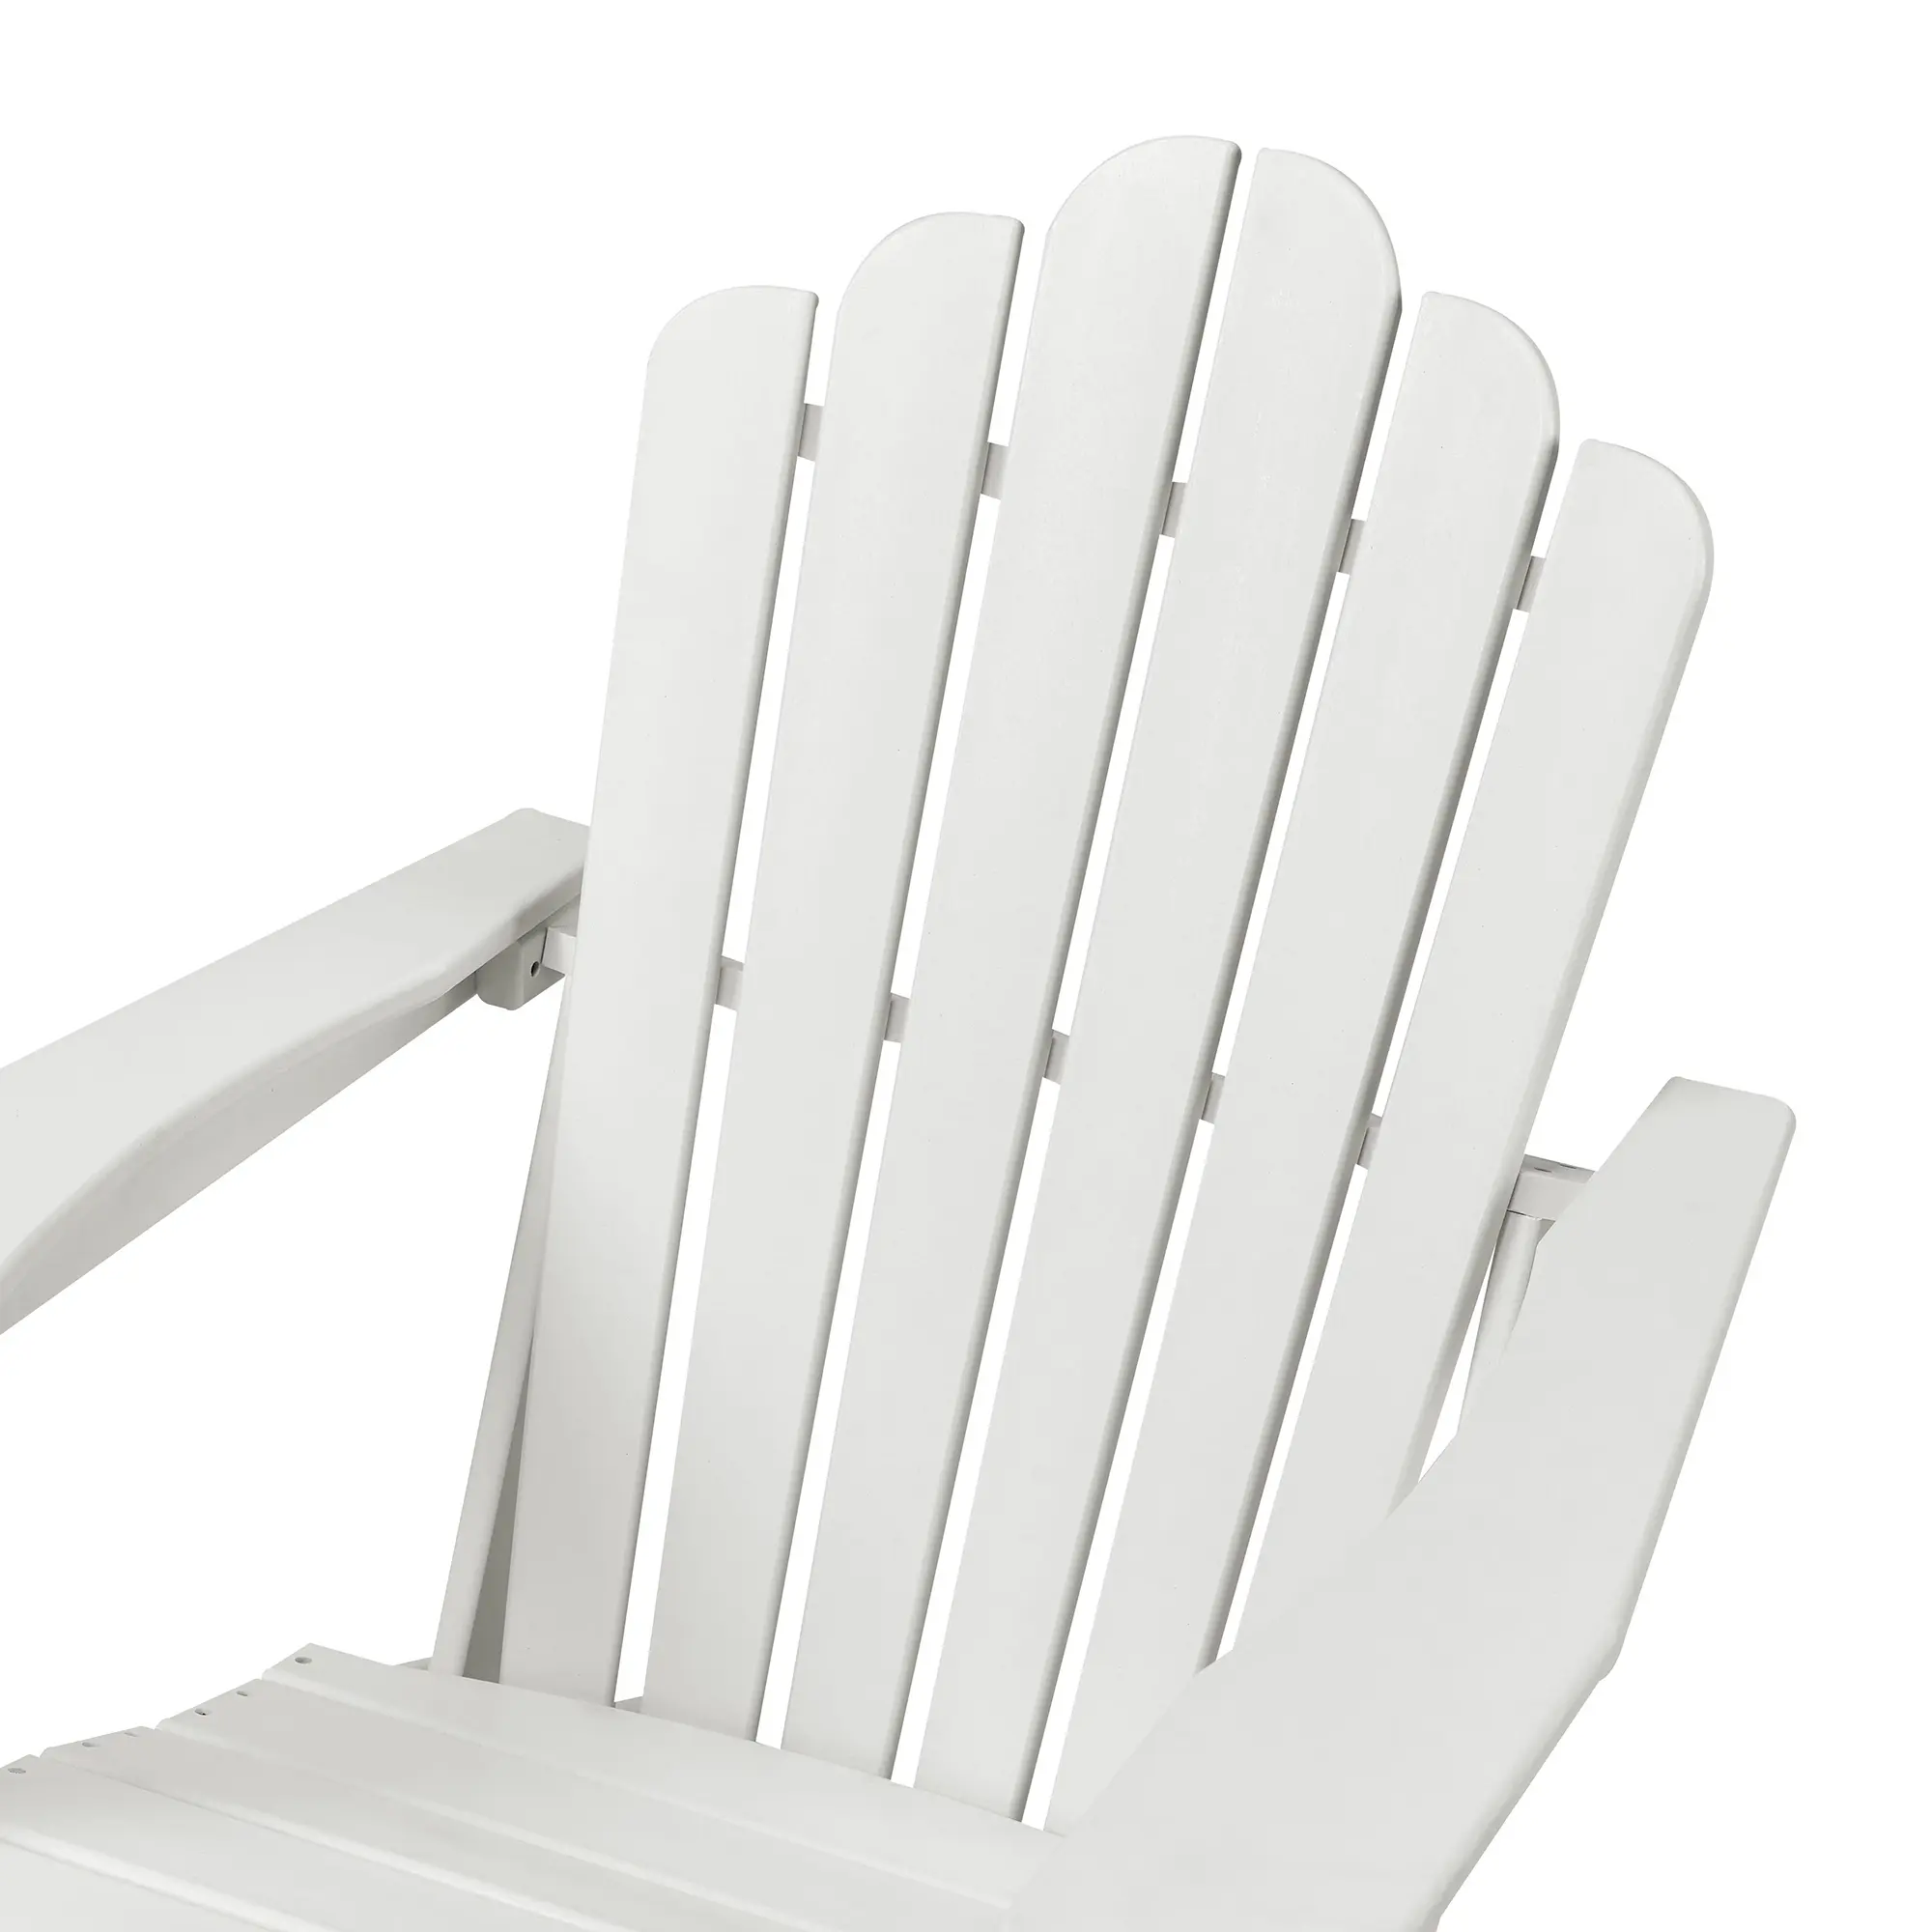 Set of 2 Classic Outdoor HDPE Adirondack Chairs for Garden 